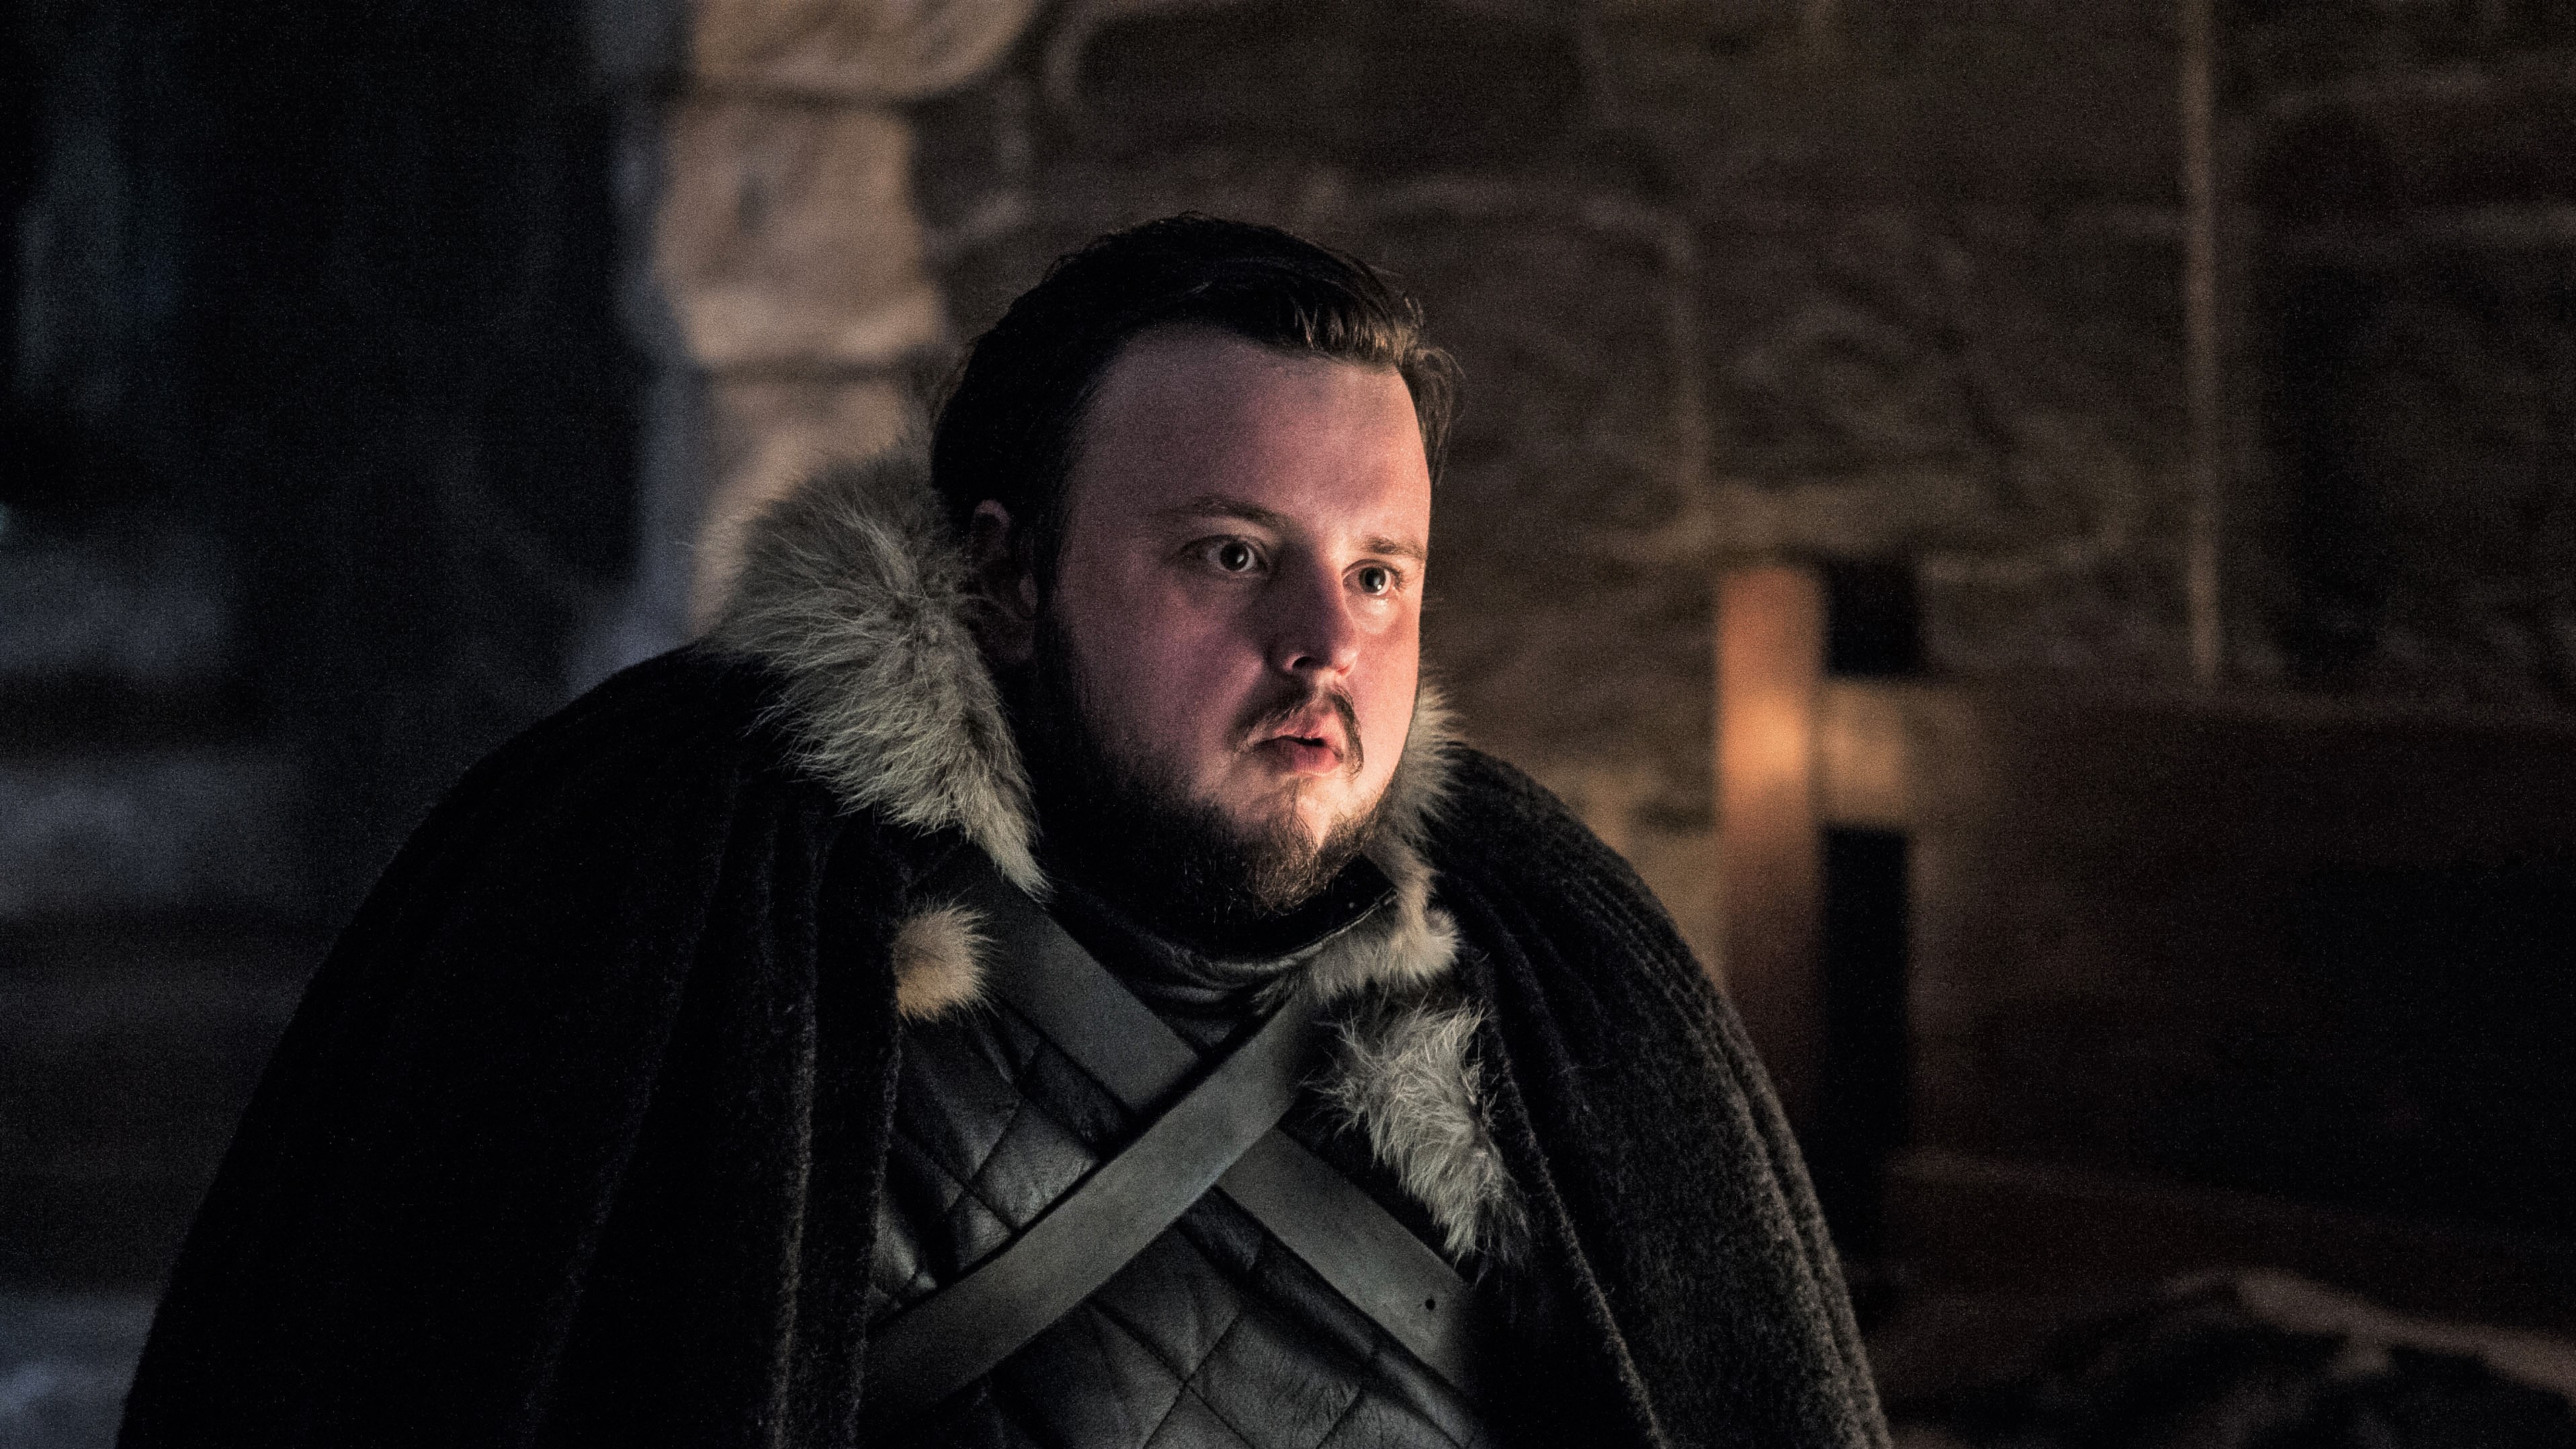 Game Of Thrones Actor John Bradley Talks About His Characters Big Moments In The Latest Episode [SPOLIERS]